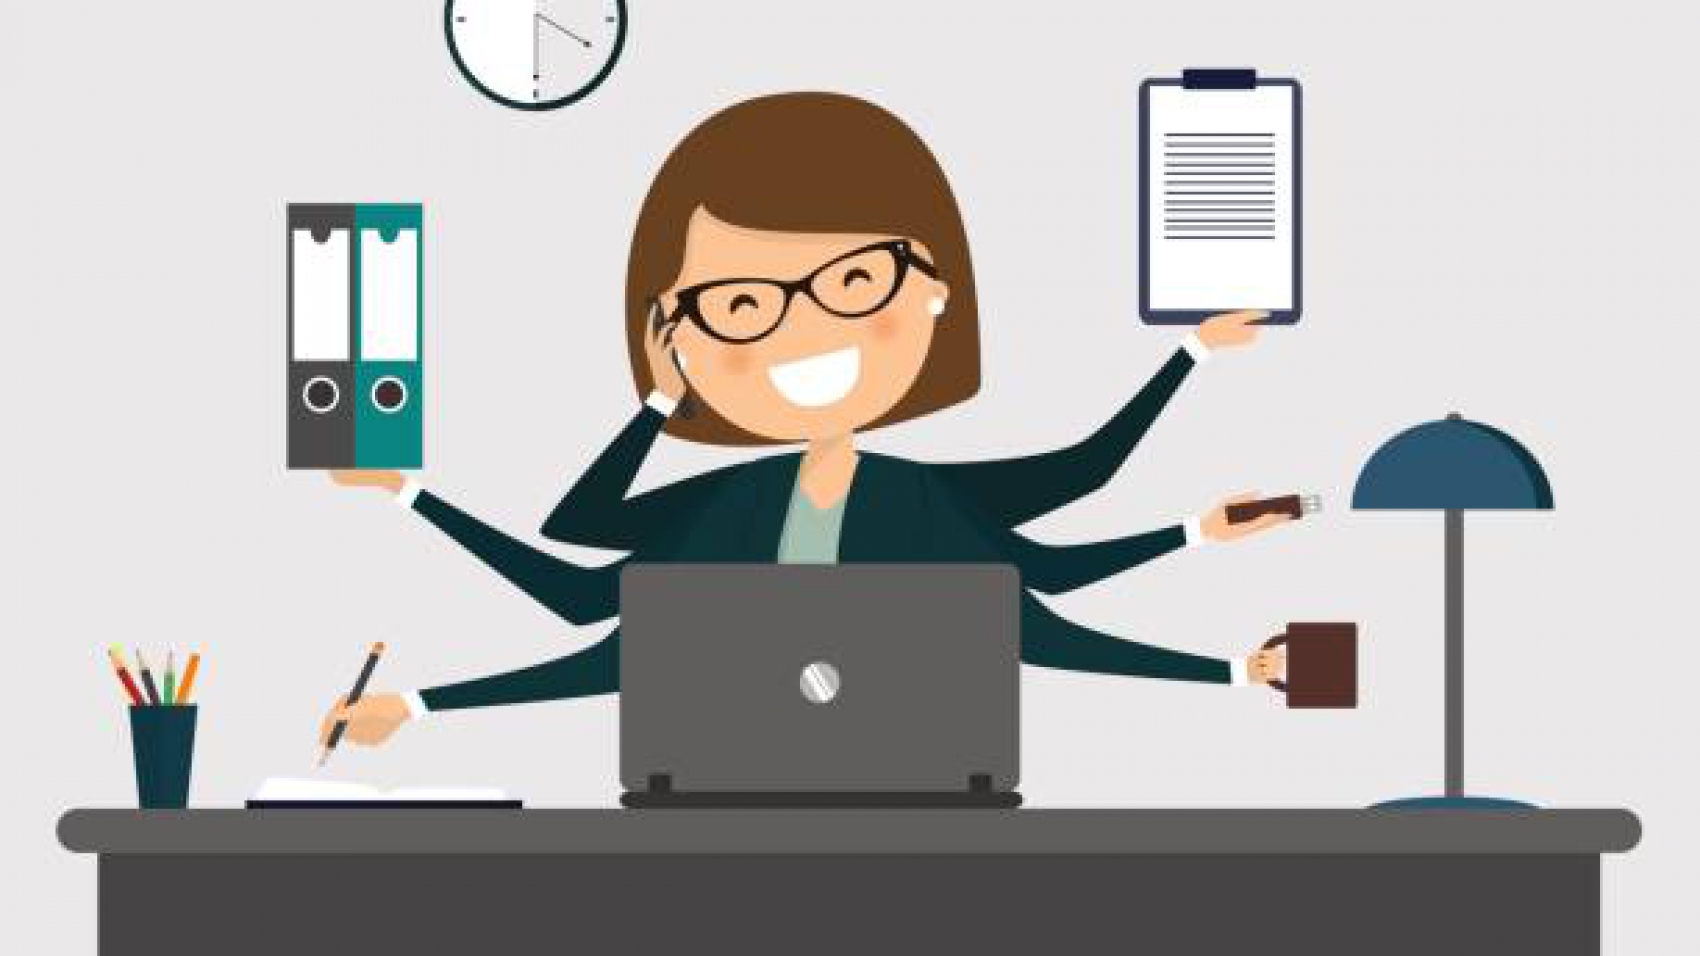 Busy secretary smiling with laptop. Vector illustration